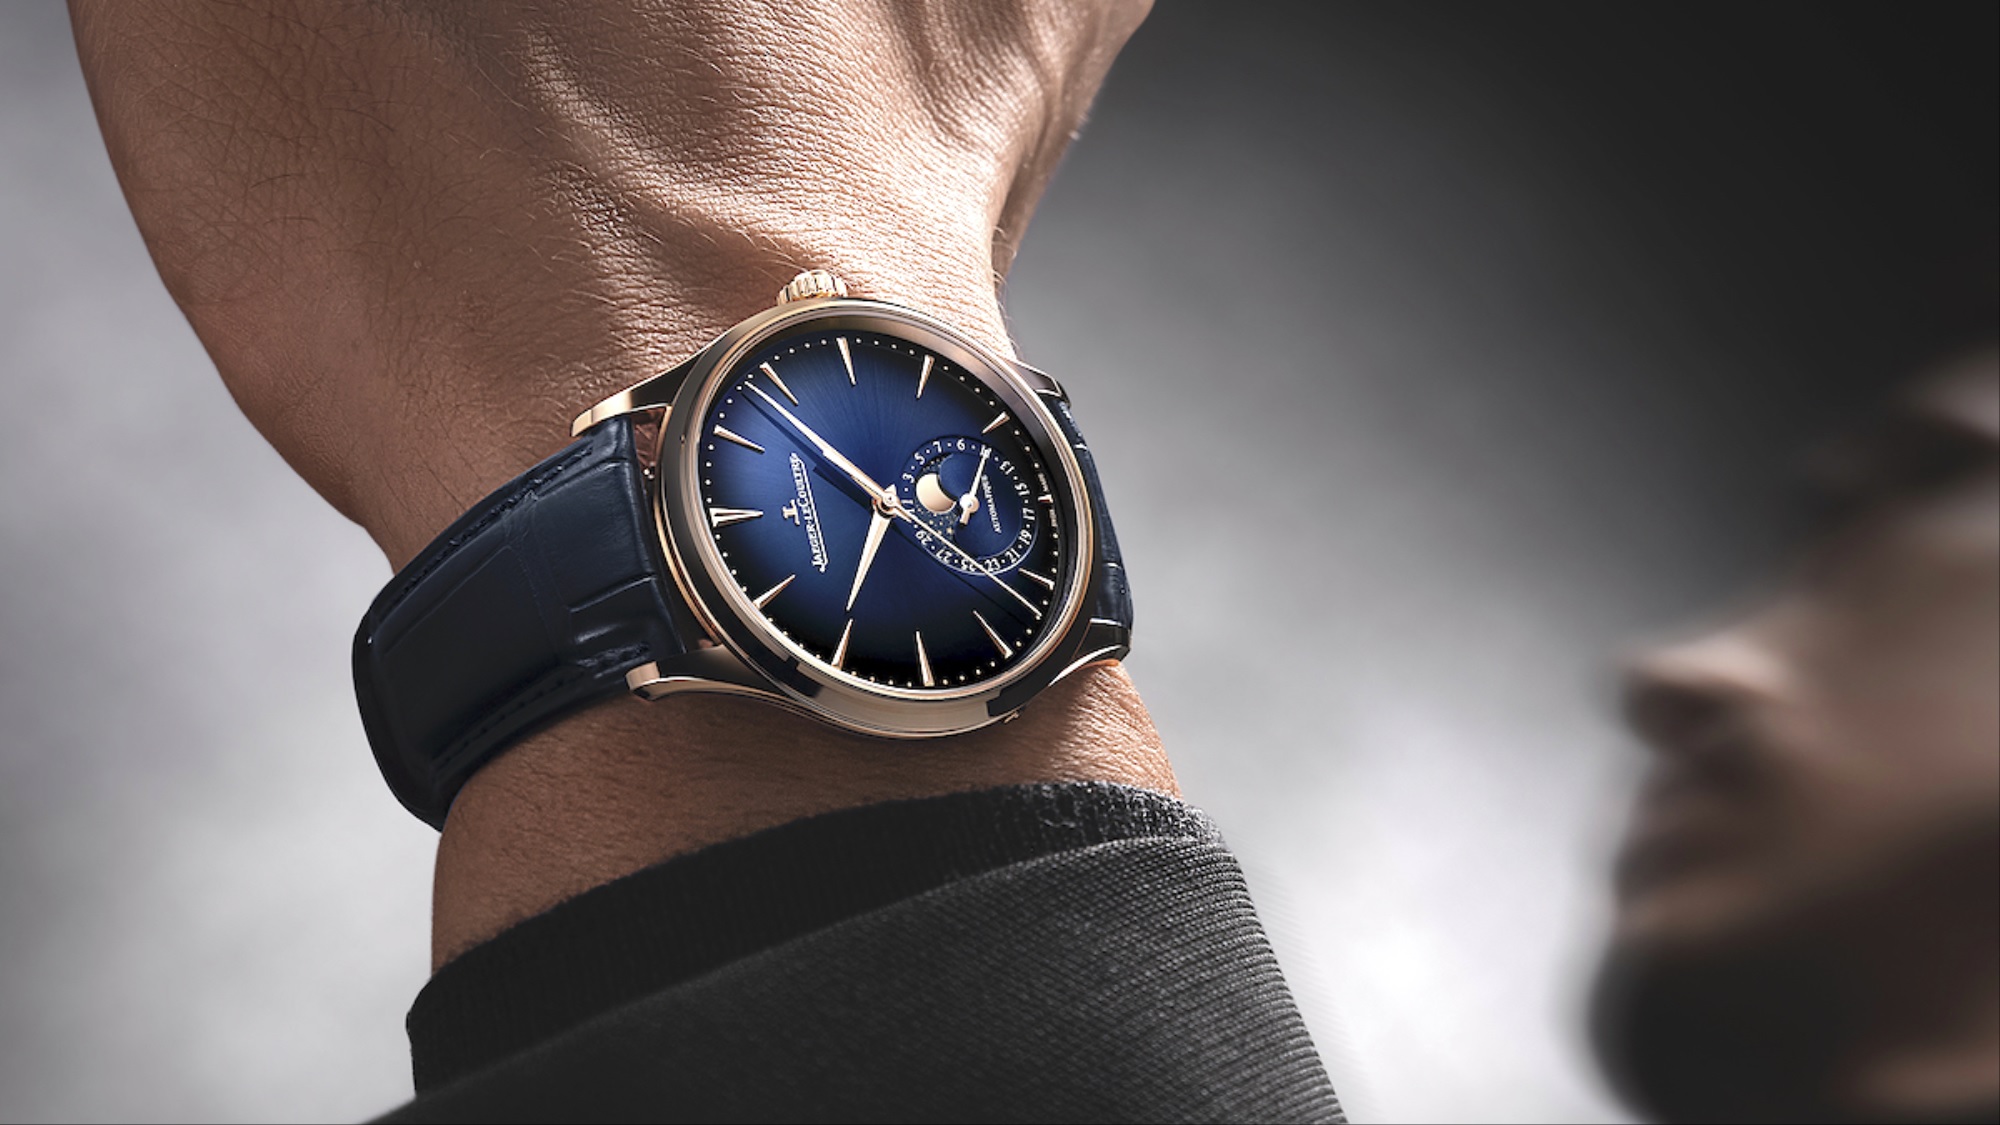 Jaeger LeCoultre Master Ultra Thin watch